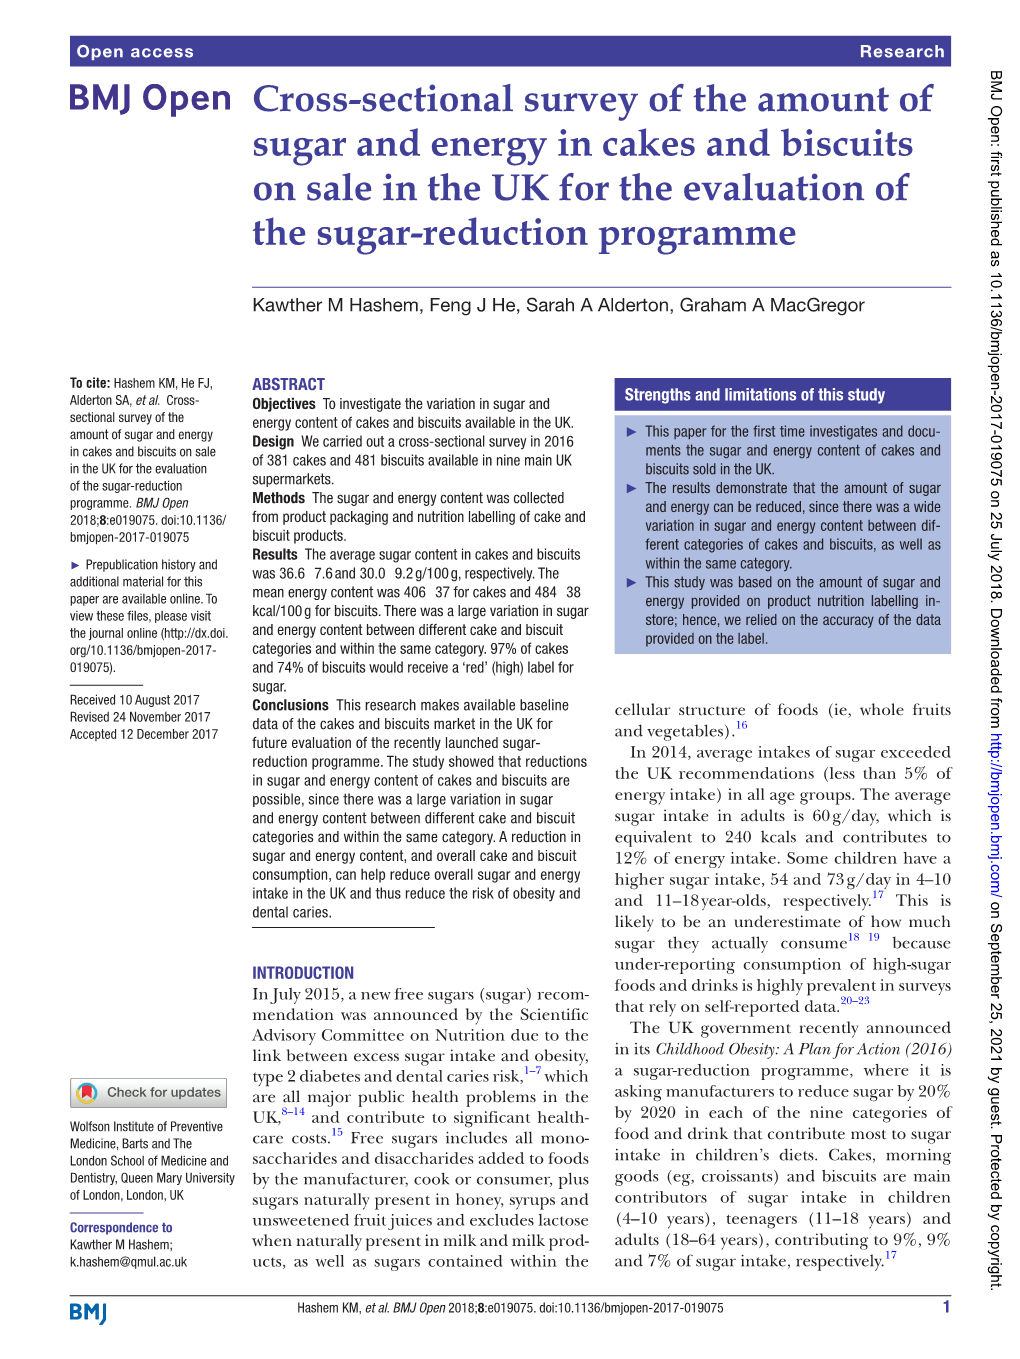 Cross-Sectional Survey of the Amount of Sugar and Energy in Cakes and Biscuits on Sale in the UK for the Evaluation of the Sugar-Reduction Programme